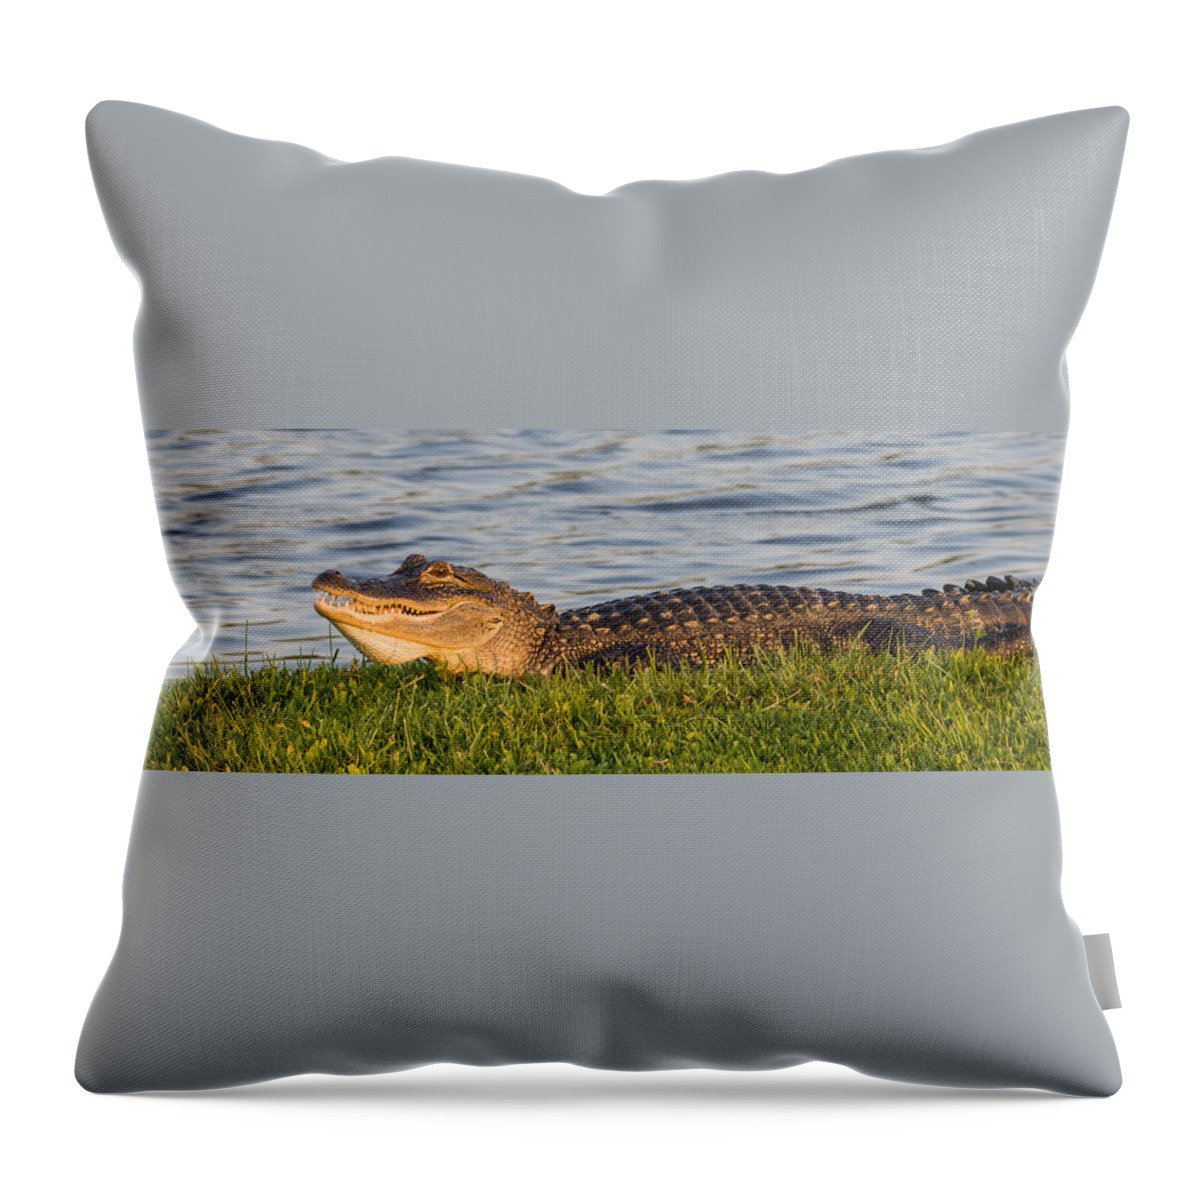 Alligator Throw Pillow featuring the photograph Alligator Smile by Ed Gleichman